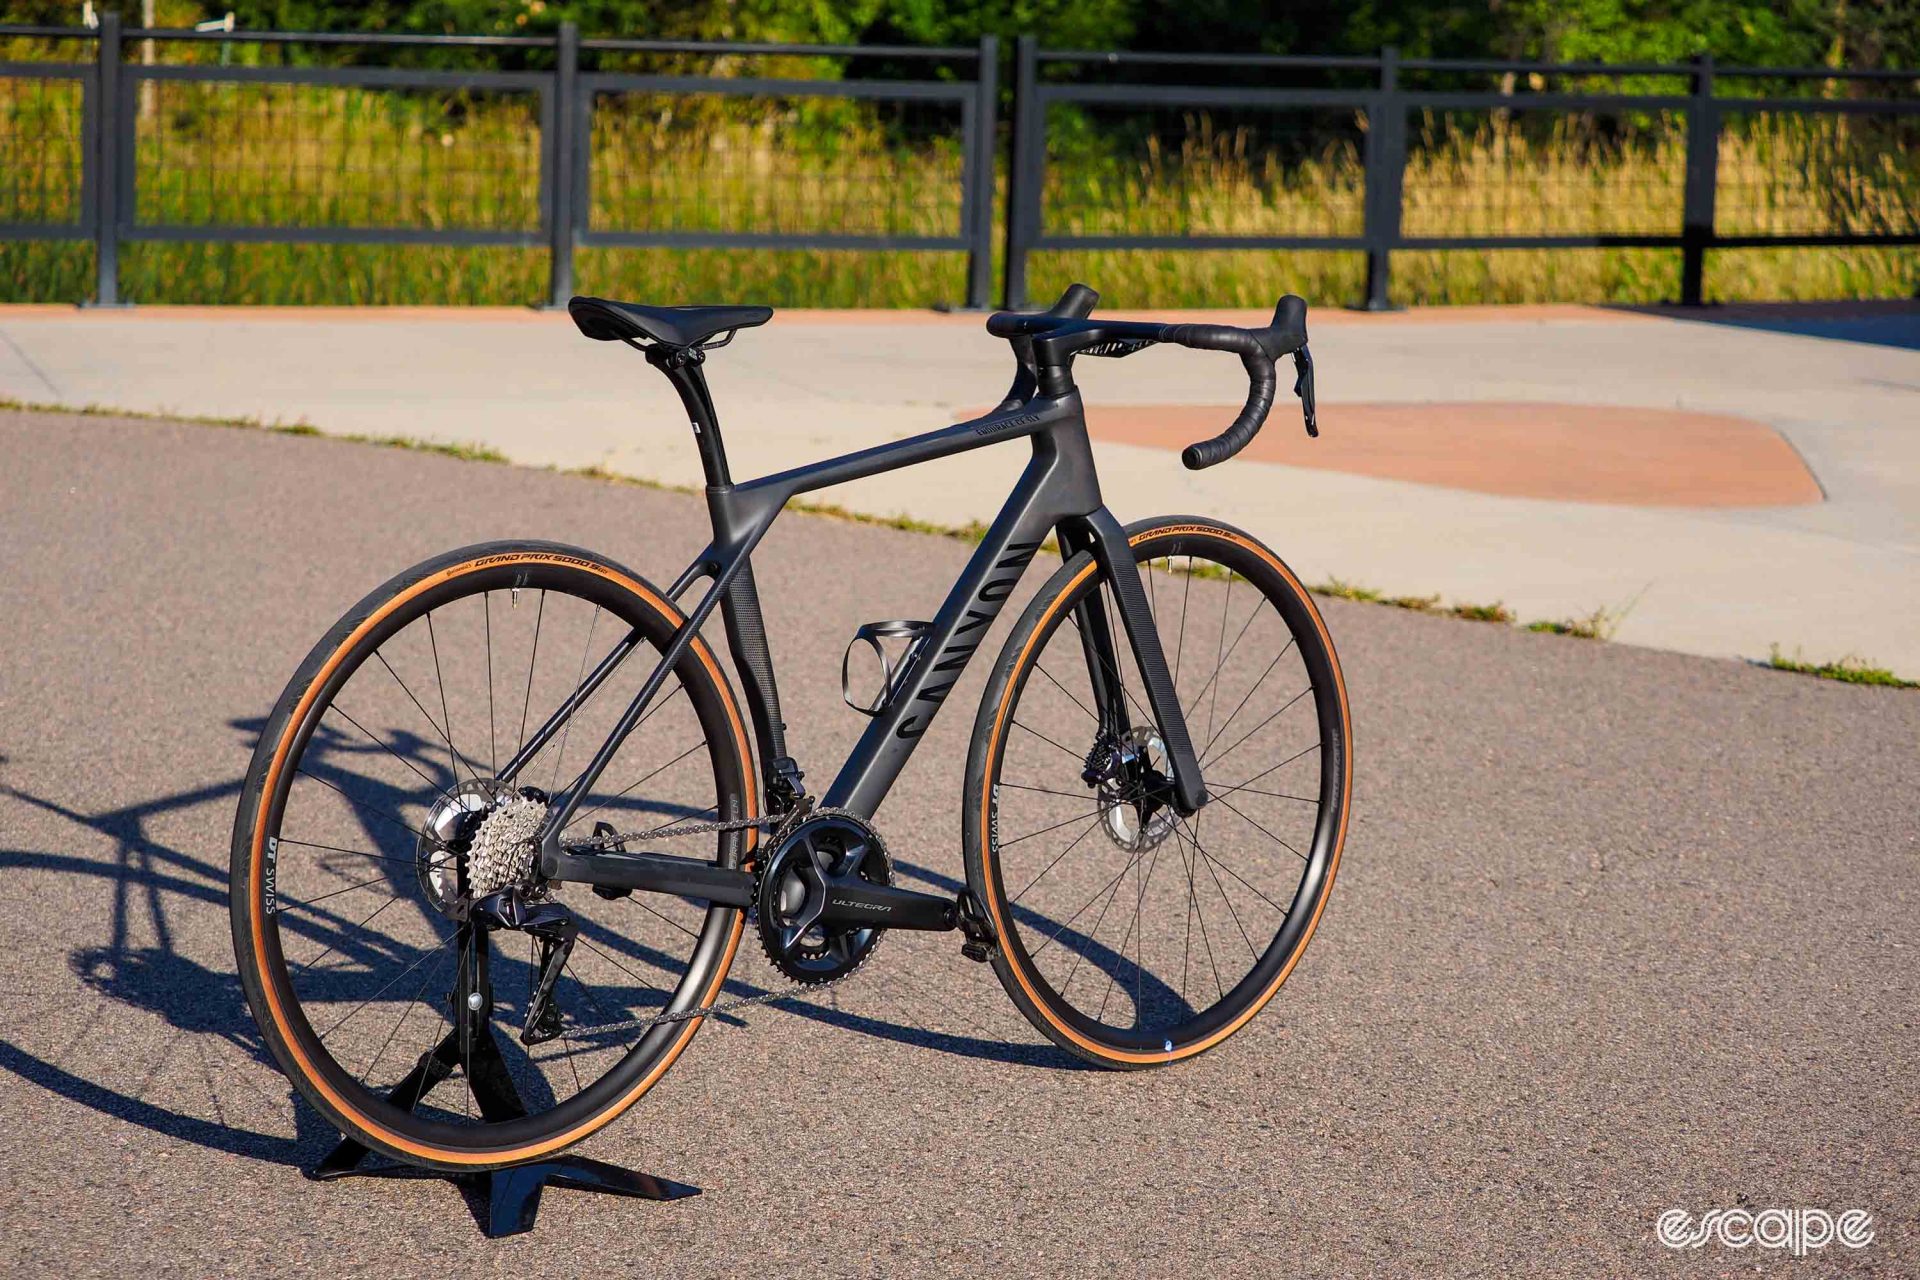 The 2024 Canyon Endurace CF in profile in warm light, with the bike pointing slightly away from the camera.